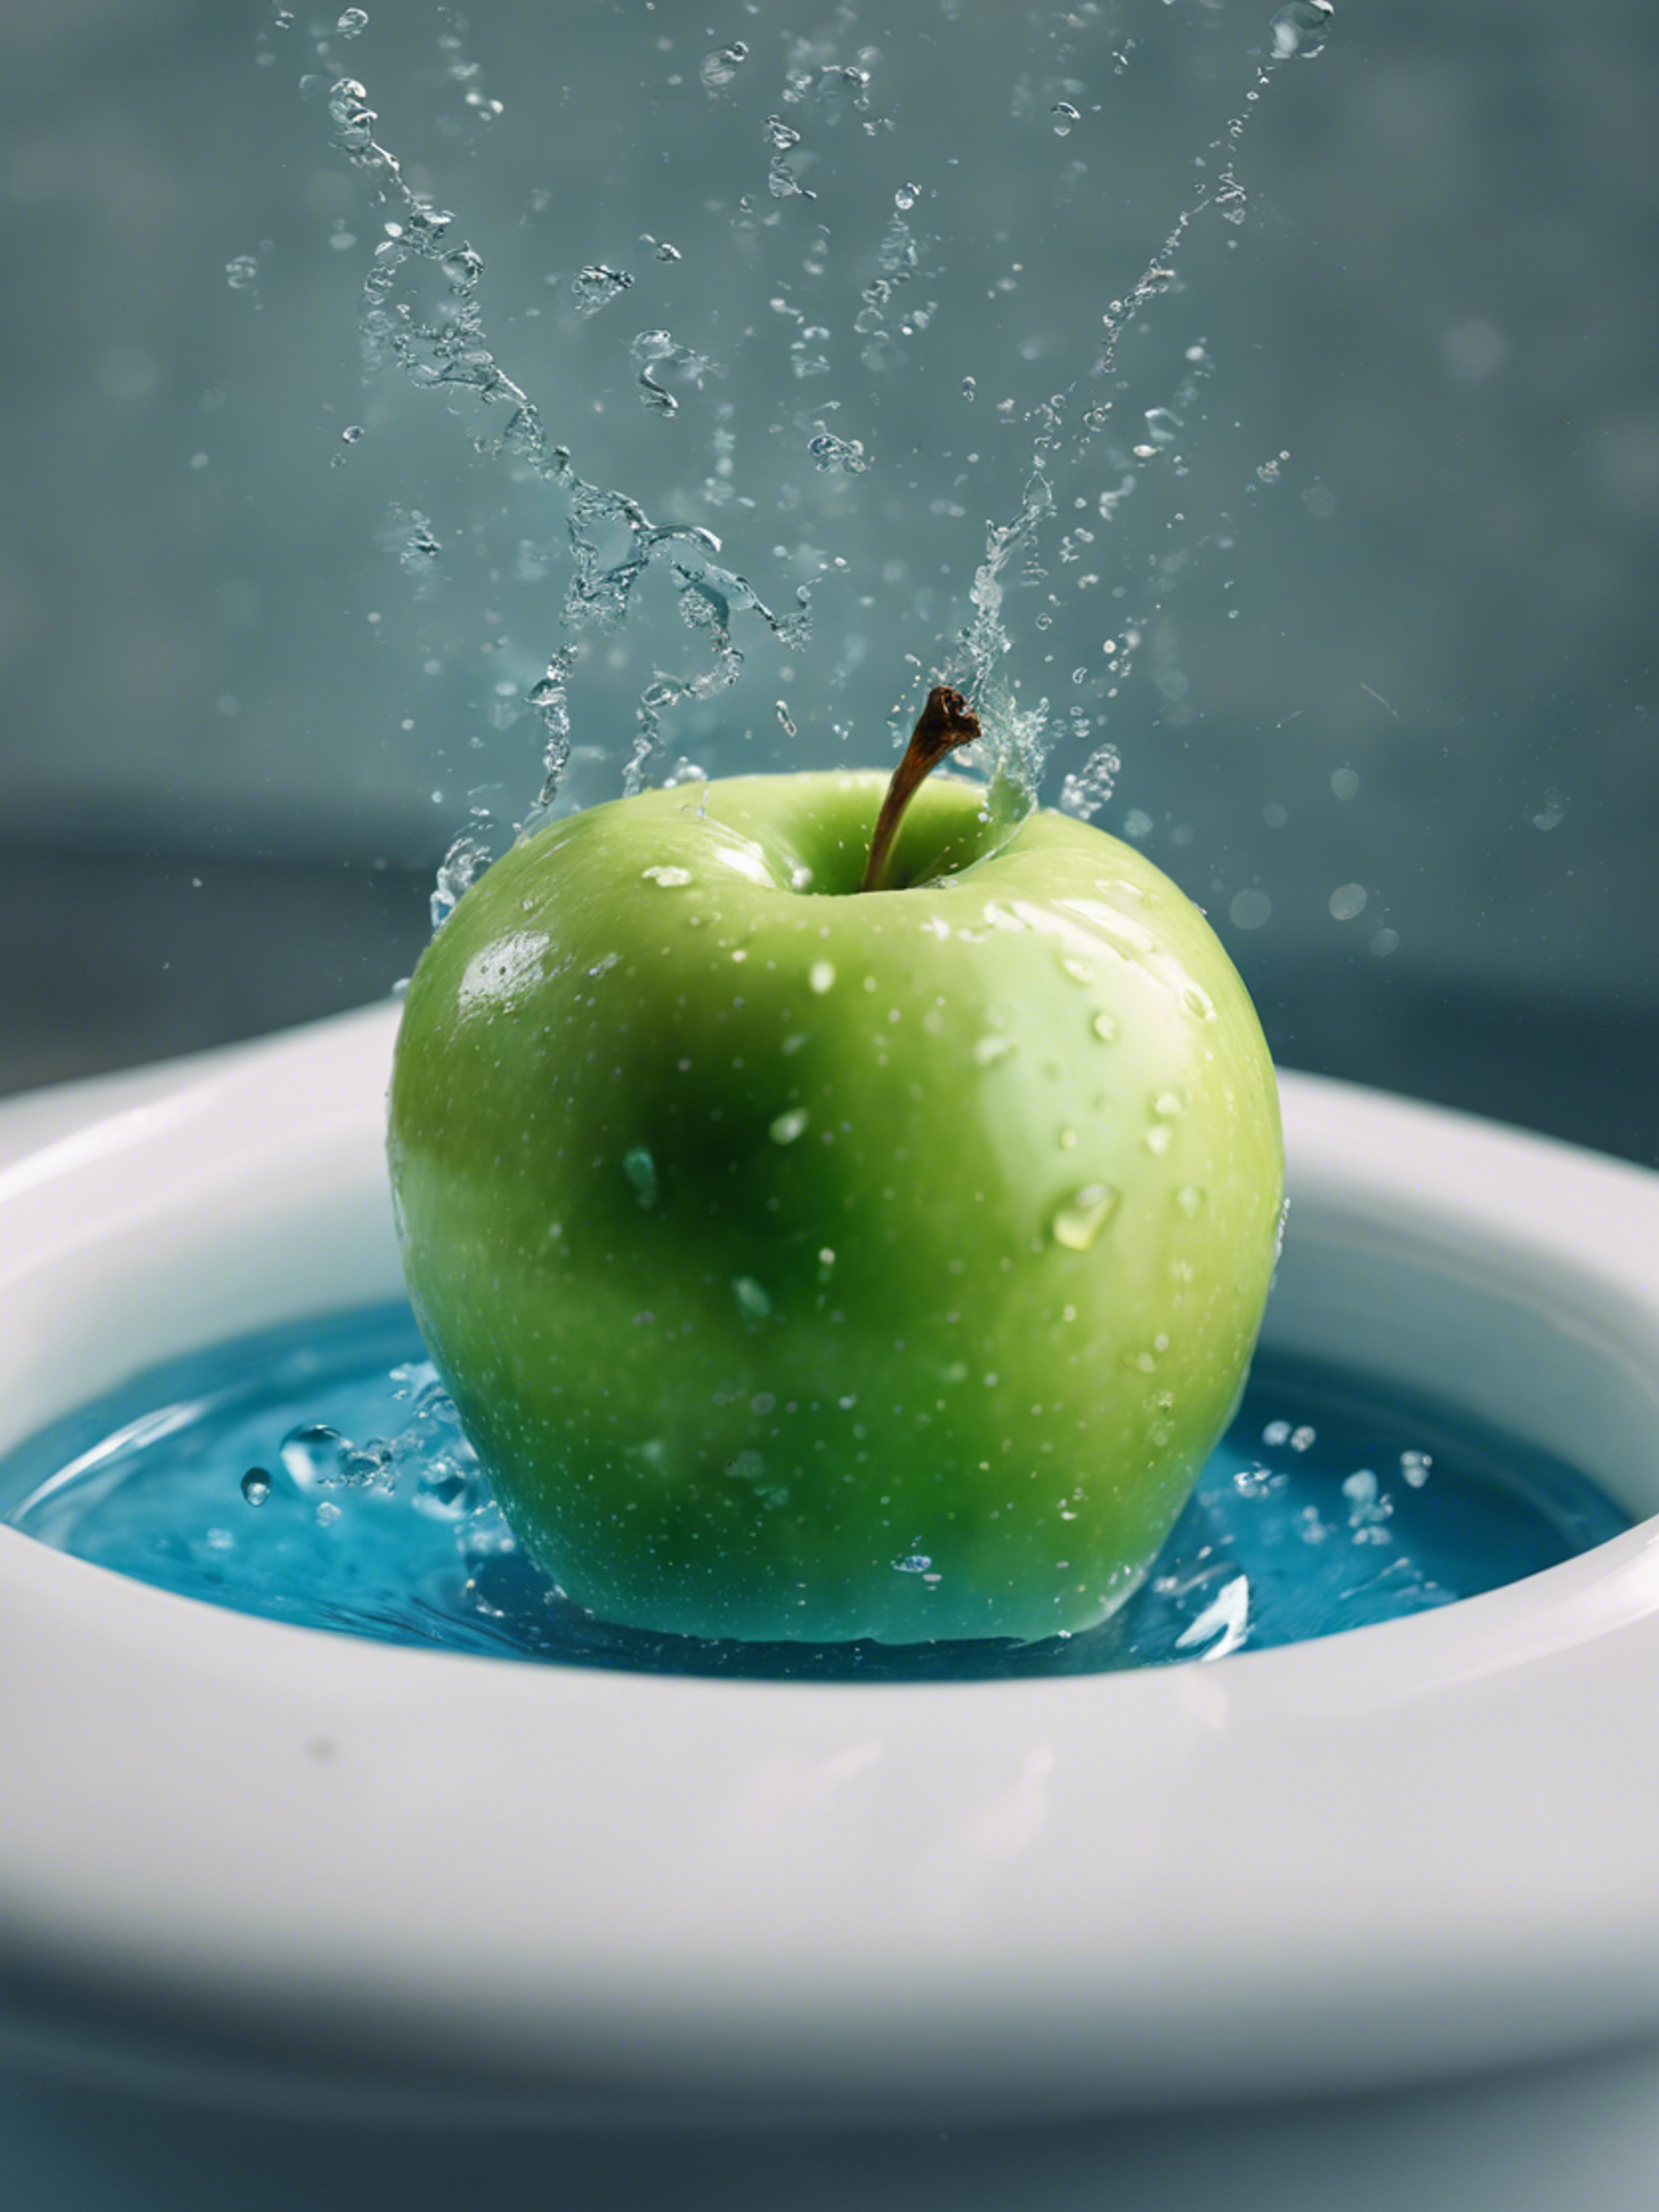 A green apple falling into a basin filled with azure blue water. Fond d'écran[a9bb5407cd4a4f929343]